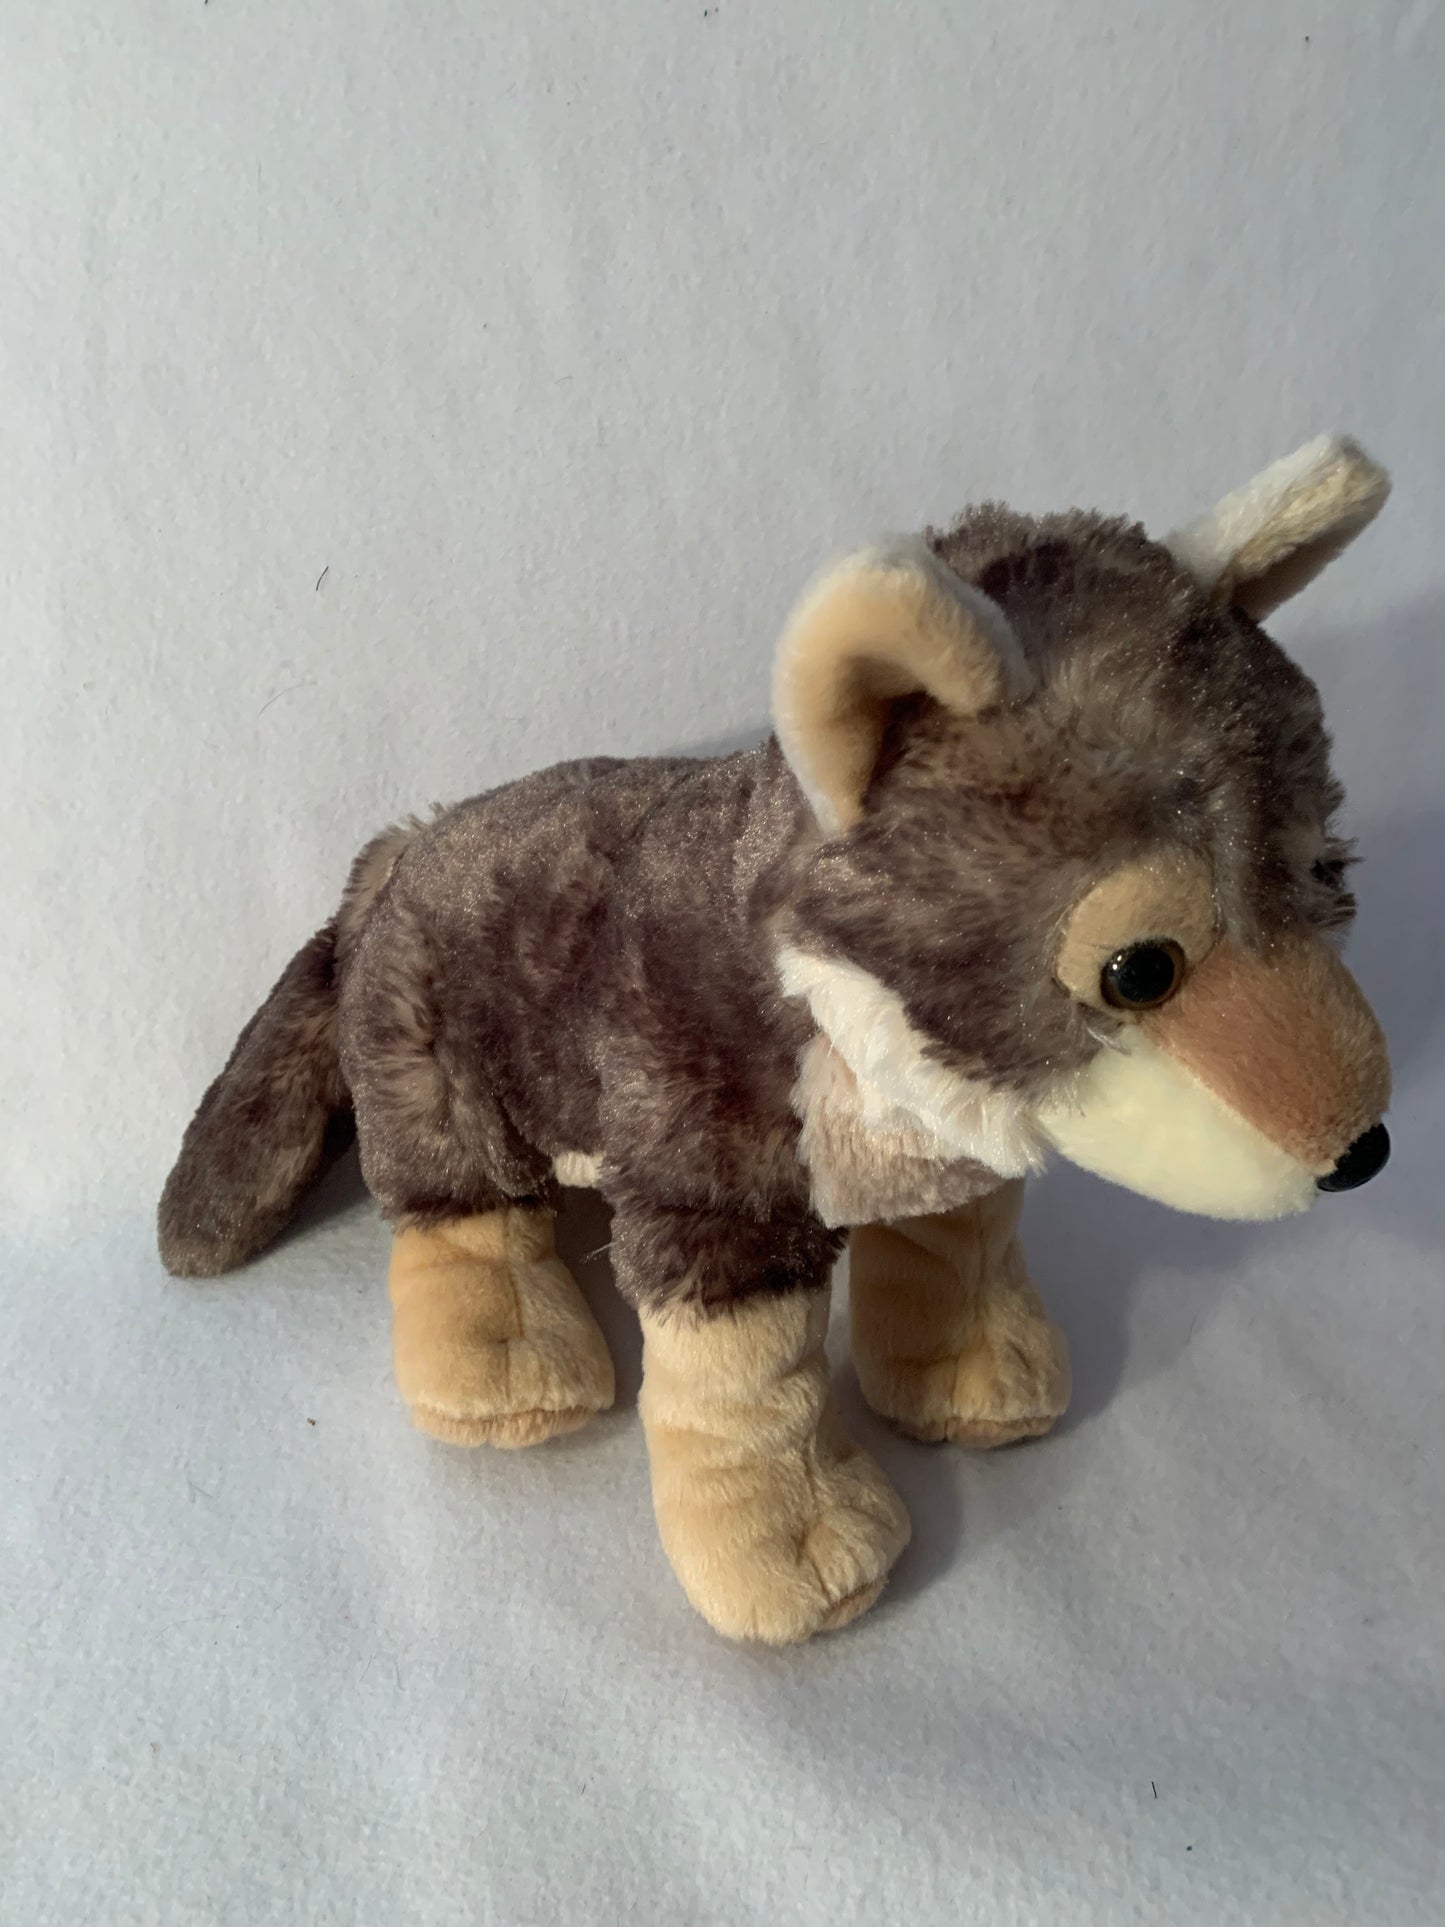 Weighted Plush wolf or fox with 3 lbs, weighted stuffed animal, washable buddy, AUTISM SENSORY TOY